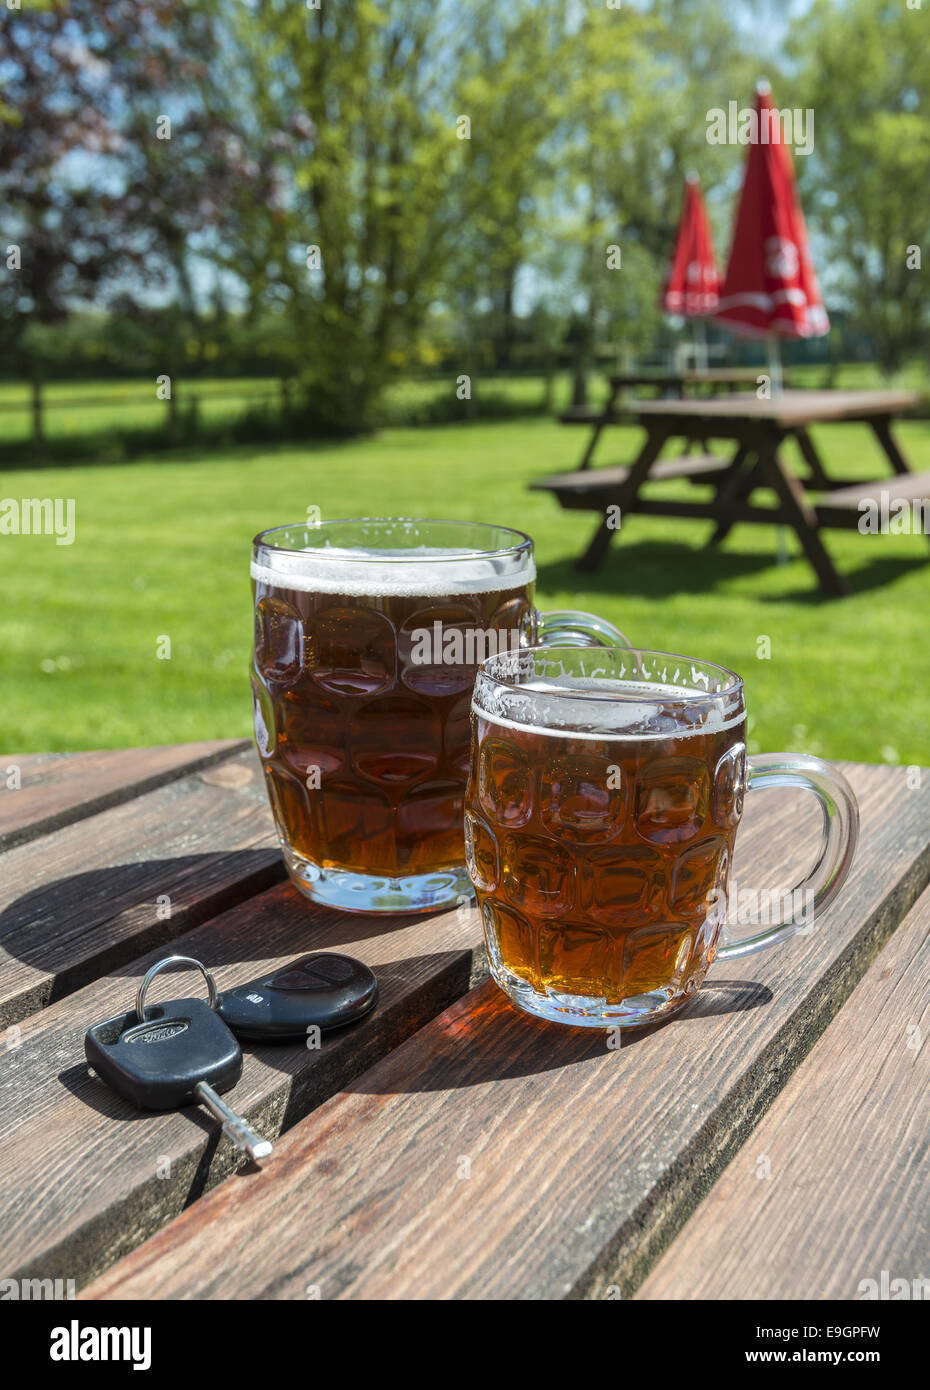 Car keys and pints of beer on a wooden beer garden table Stock Photo